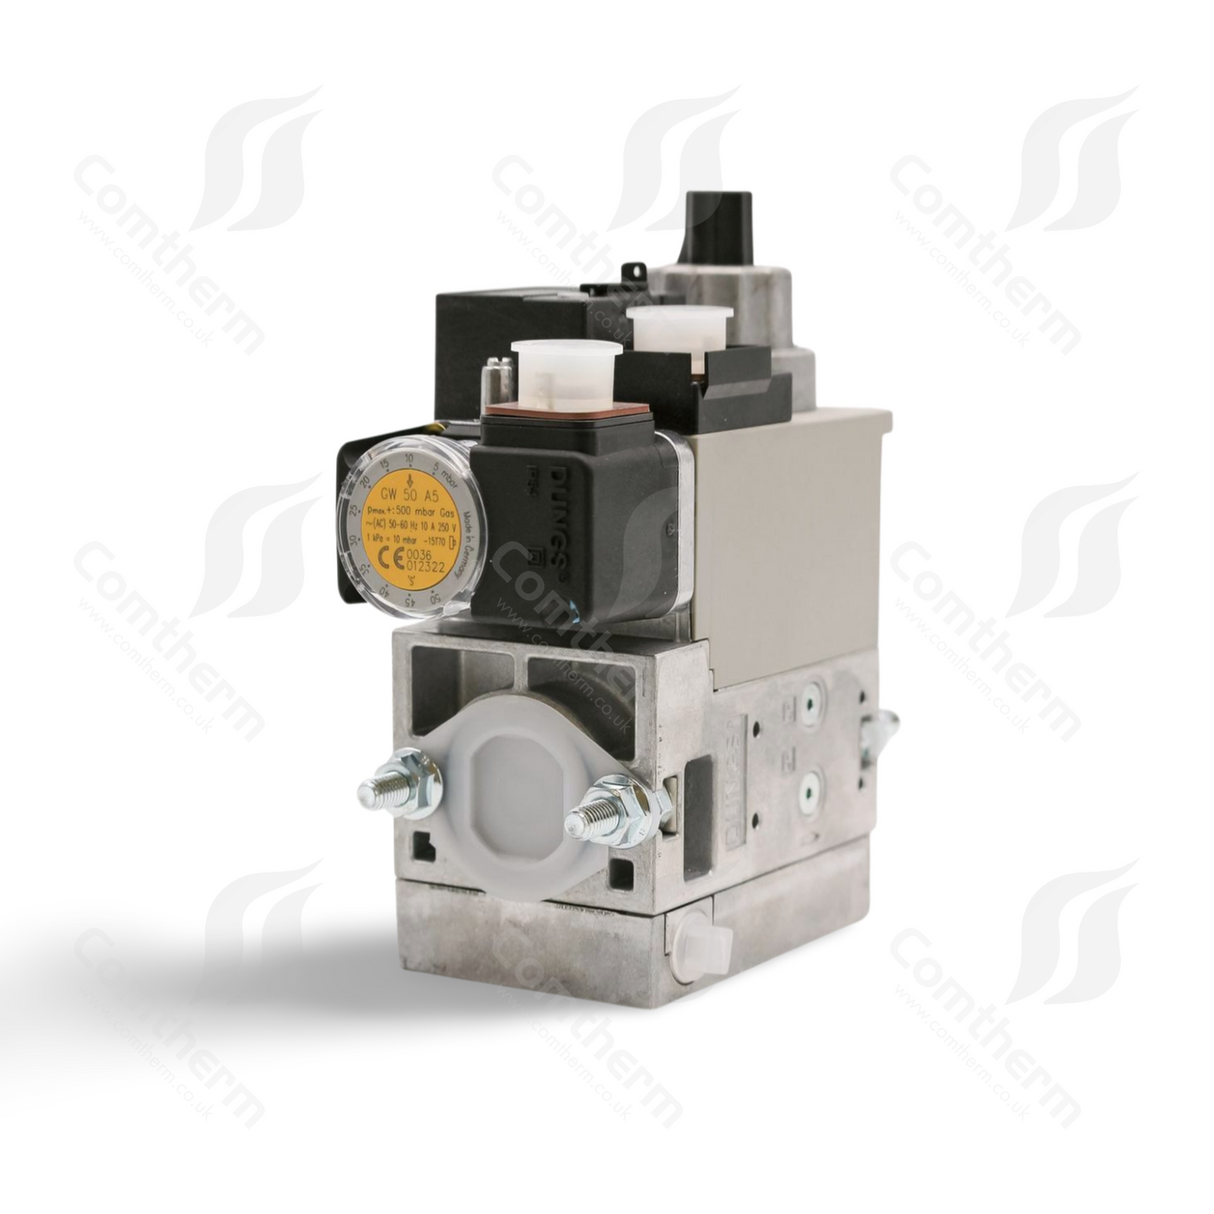 Dungs MB-DLE 407 B01 S50 + GW150A5 Multiblock-Gasventil – 230 V 